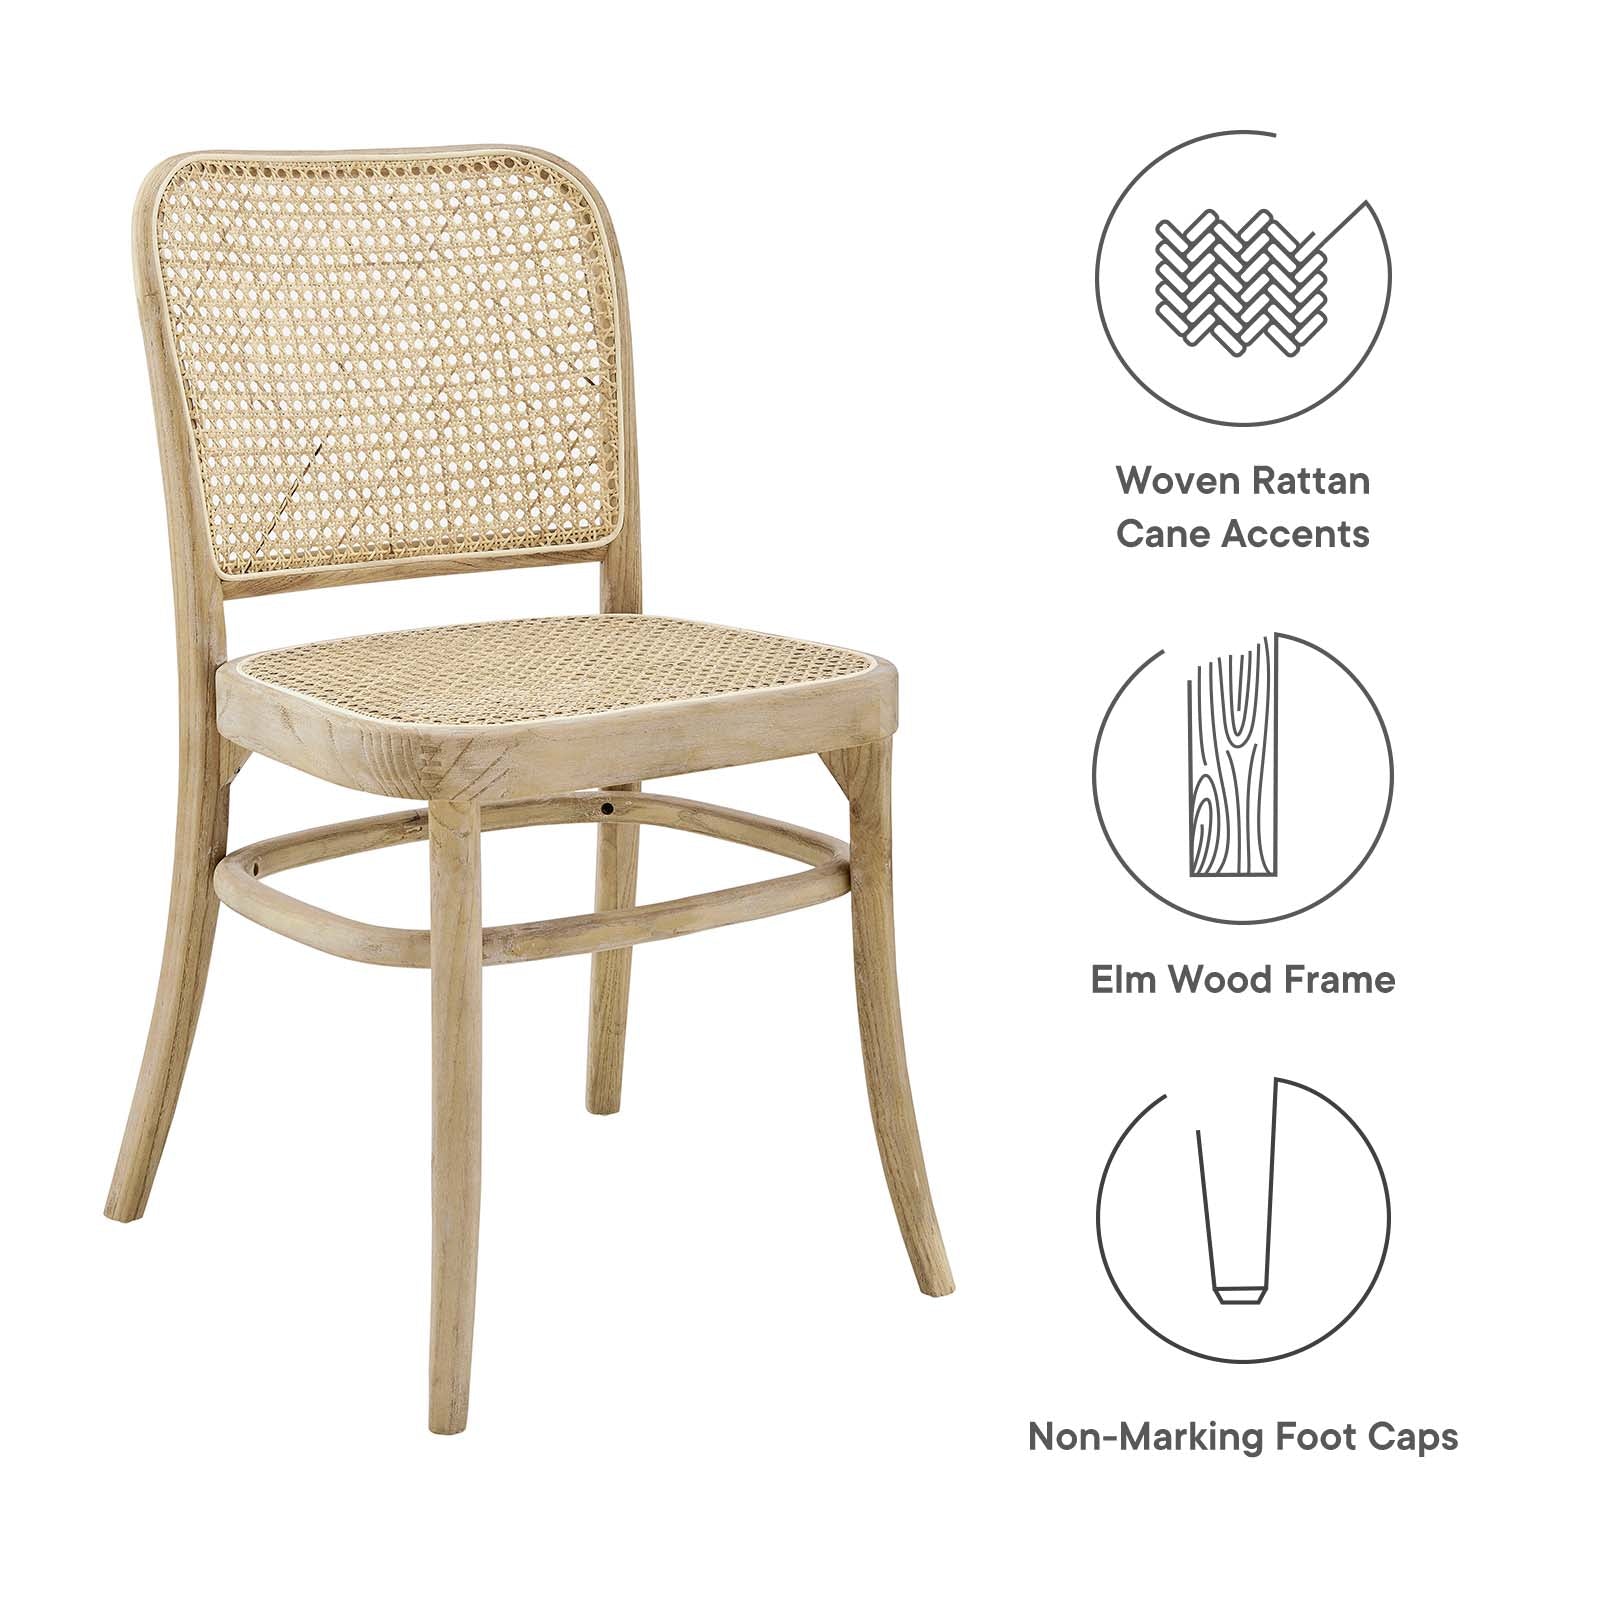 Winona Wood Dining Side Chair Set of 2 - East Shore Modern Home Furnishings